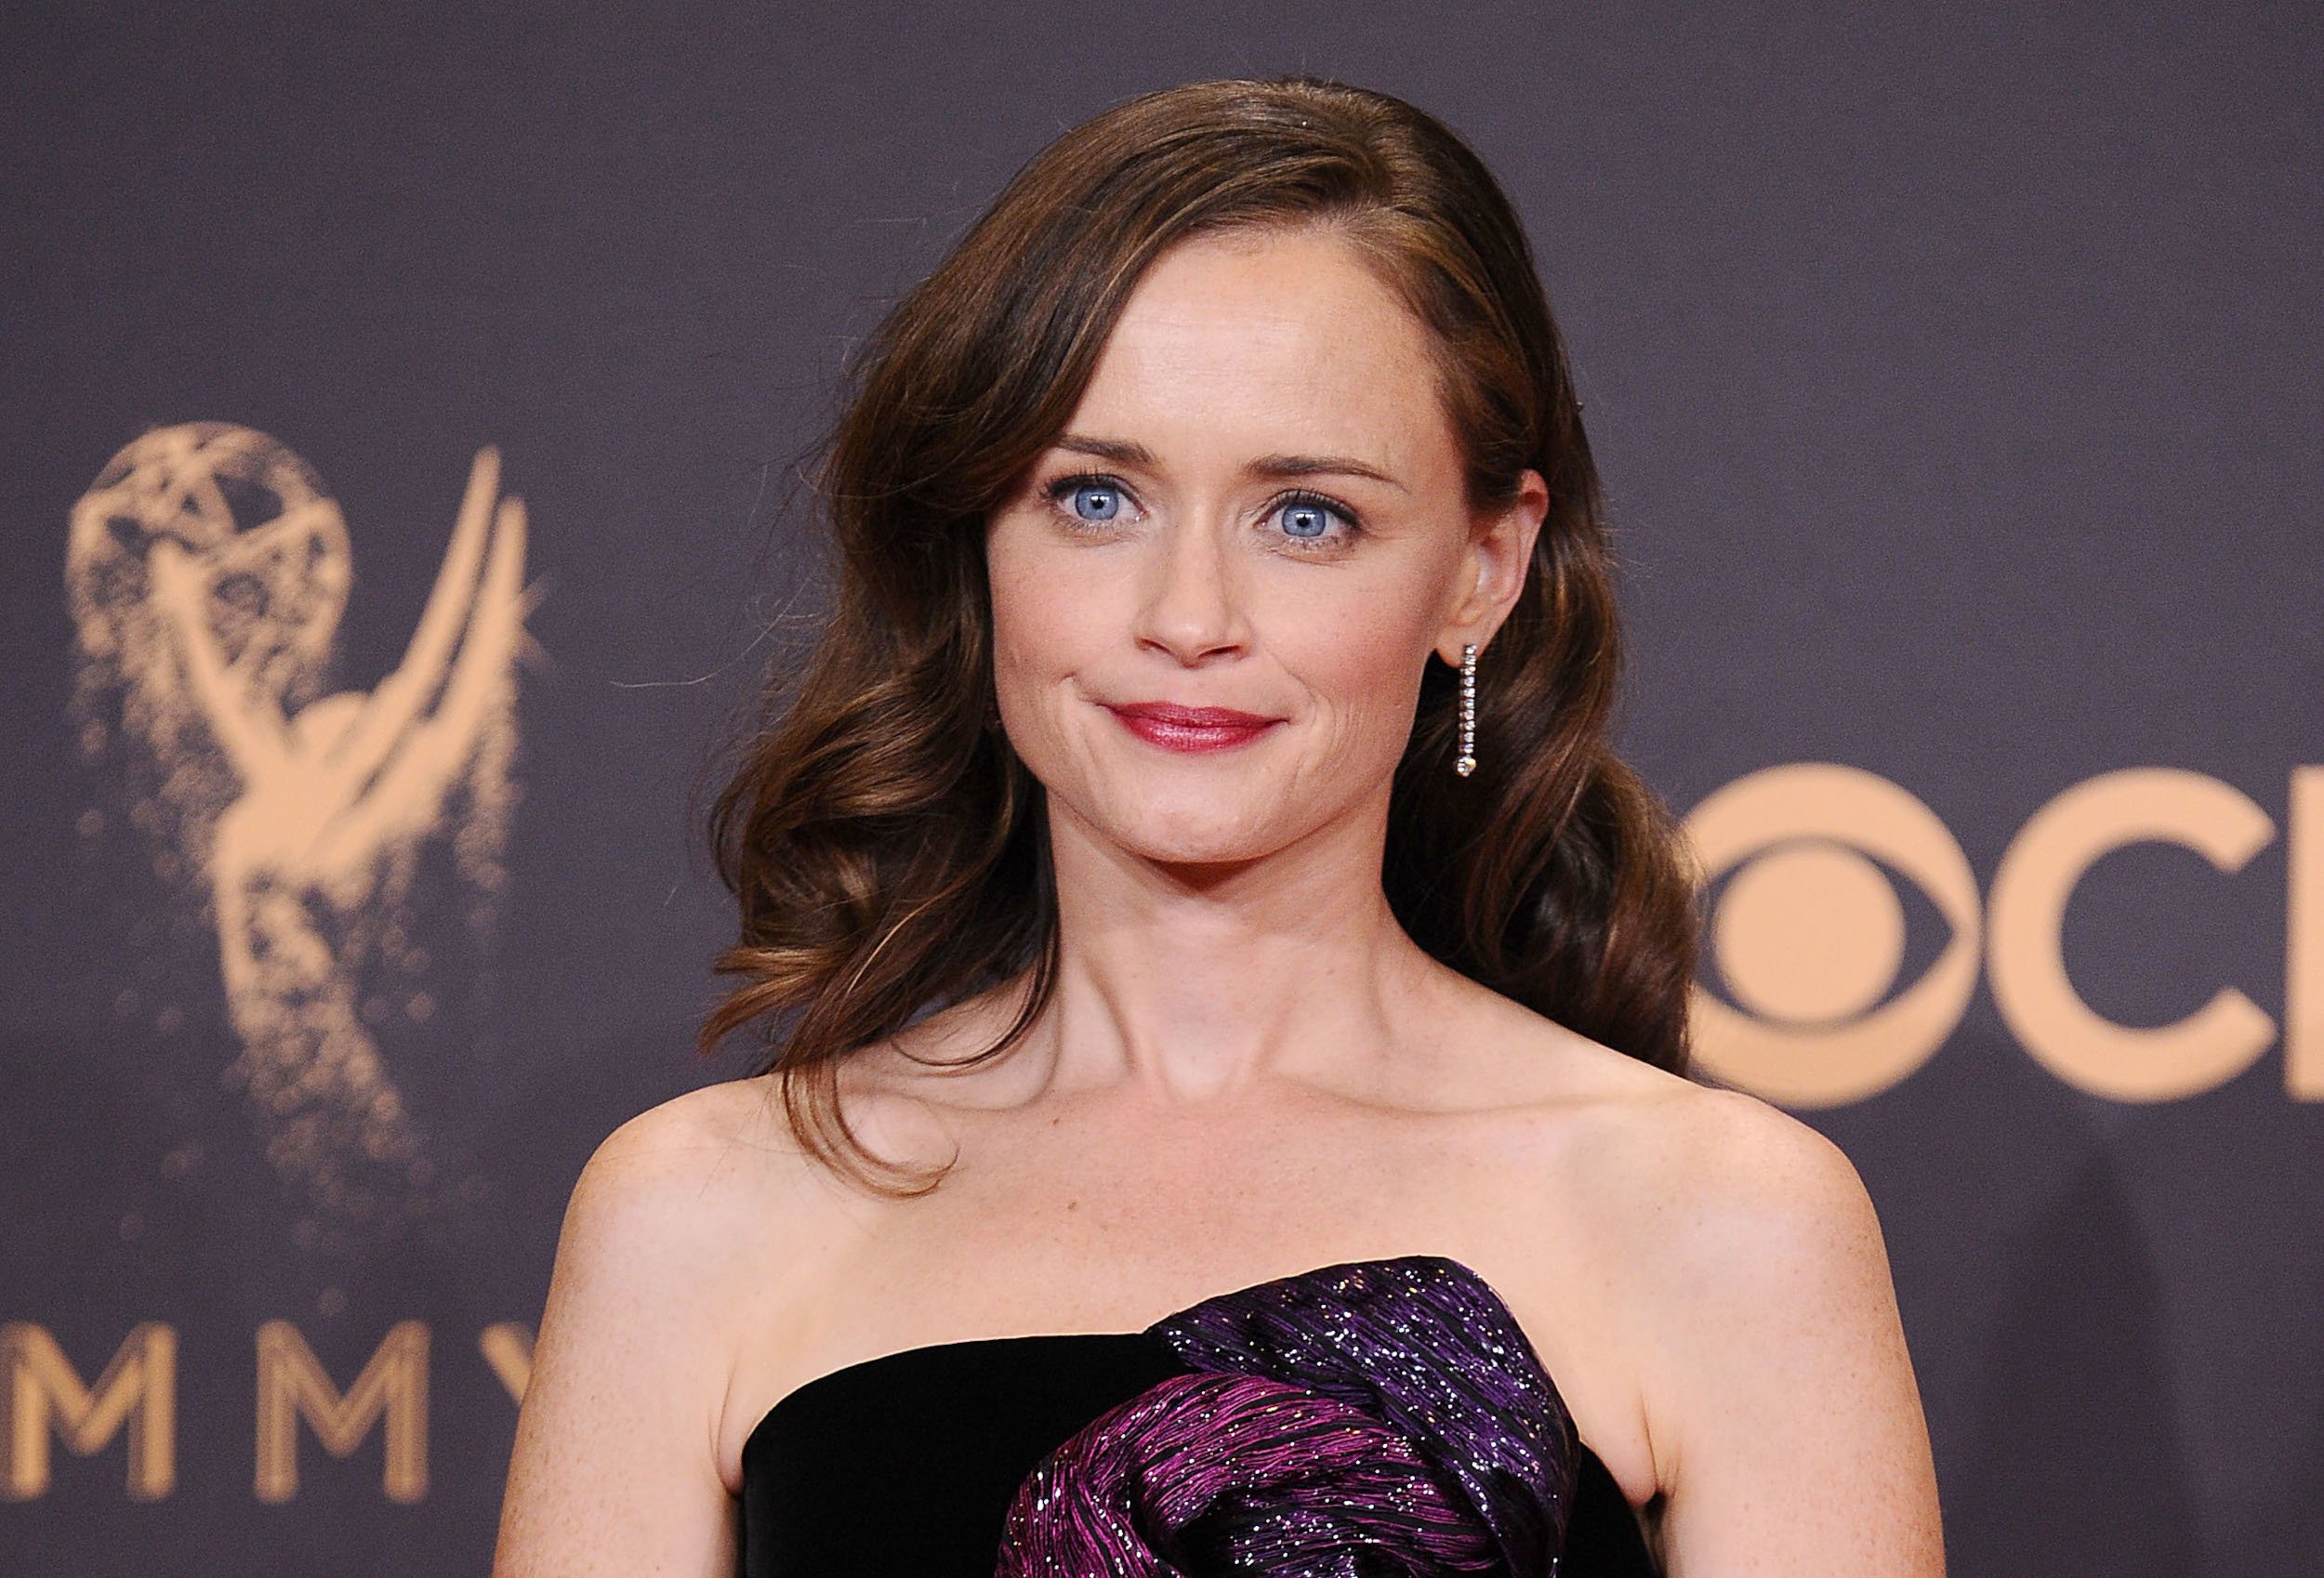 'Gilmore Girls' star Alexis Bledel wears a purple dress and stands in front of an Emmy wall